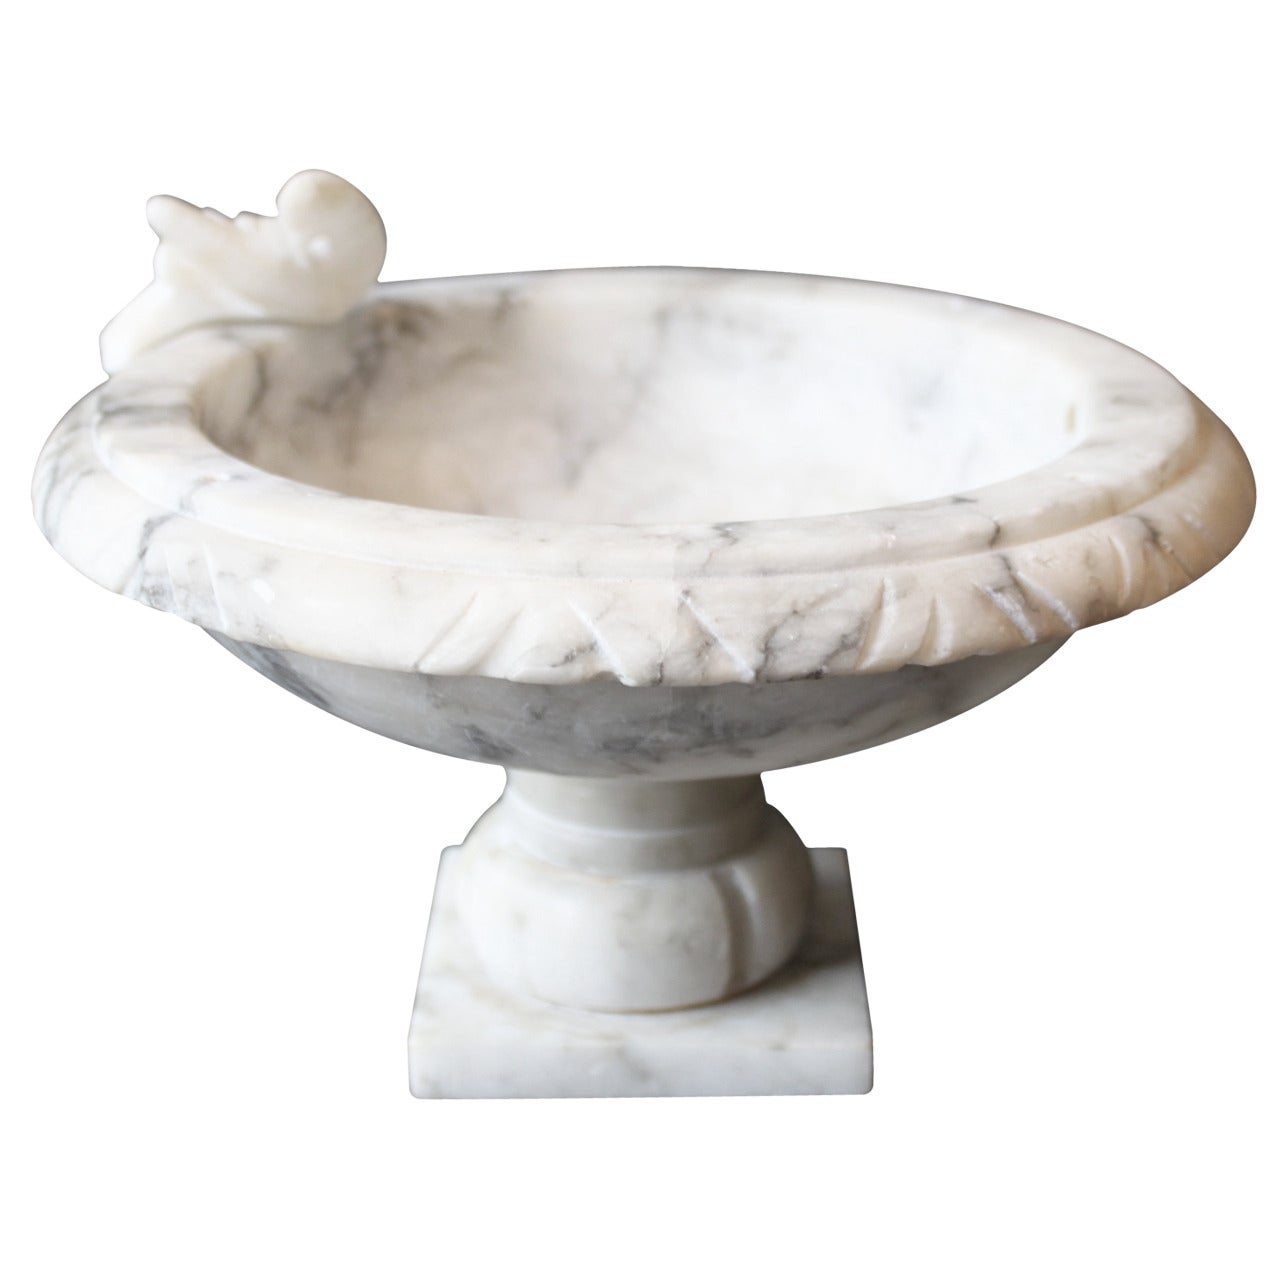 White Carrara Marble Footed Bowl with Carved Bird